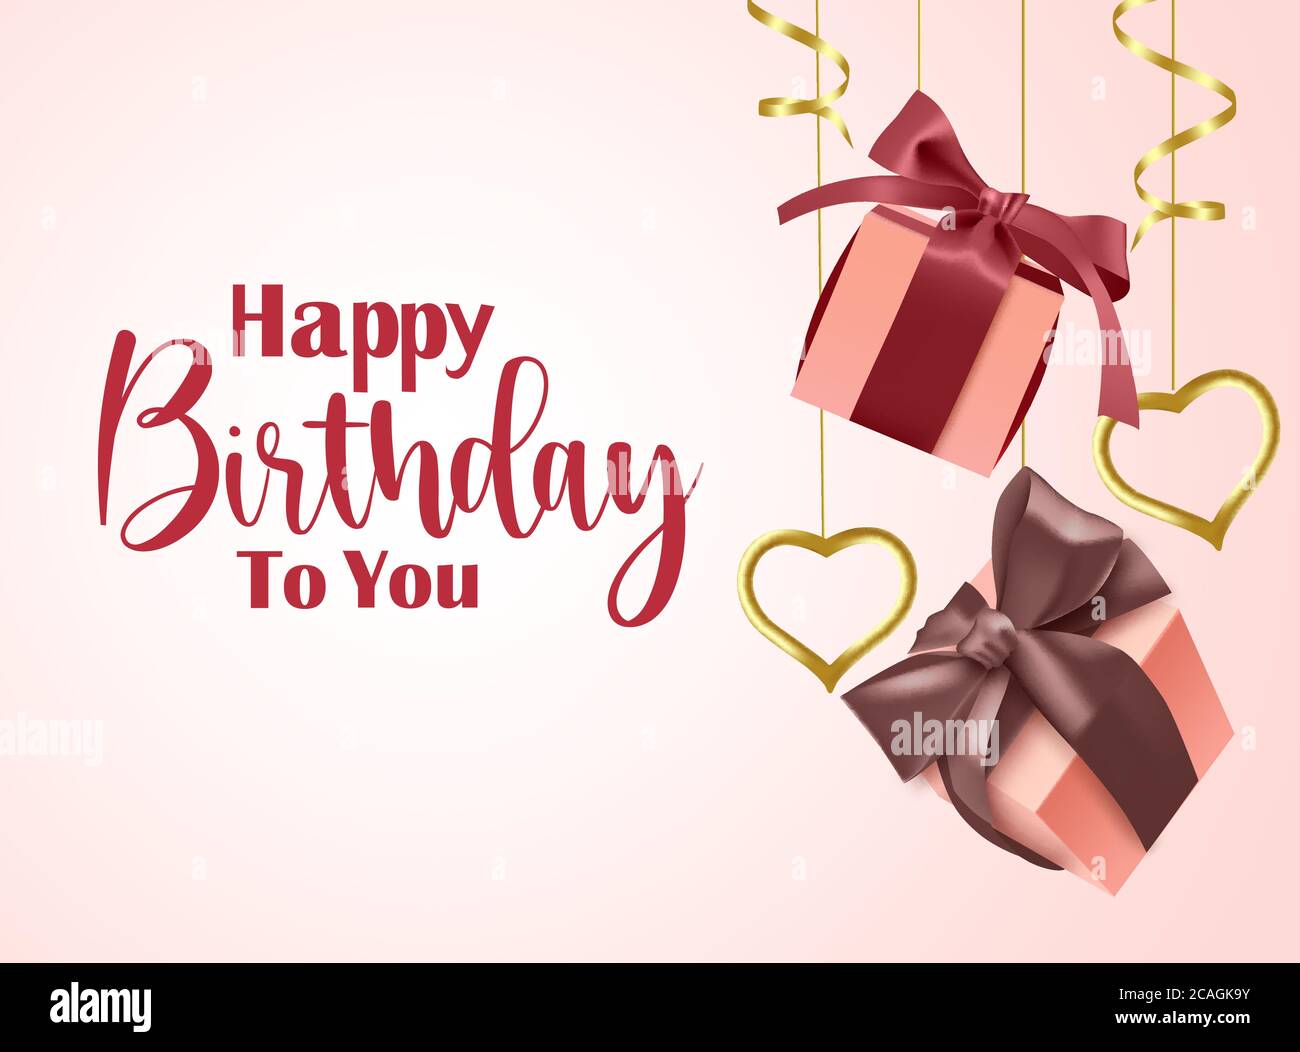 Happy birthday gifts vector banner template. Happy birthday greeting text in empty space for messages with hanging elegant party elements like gift. Stock Vector